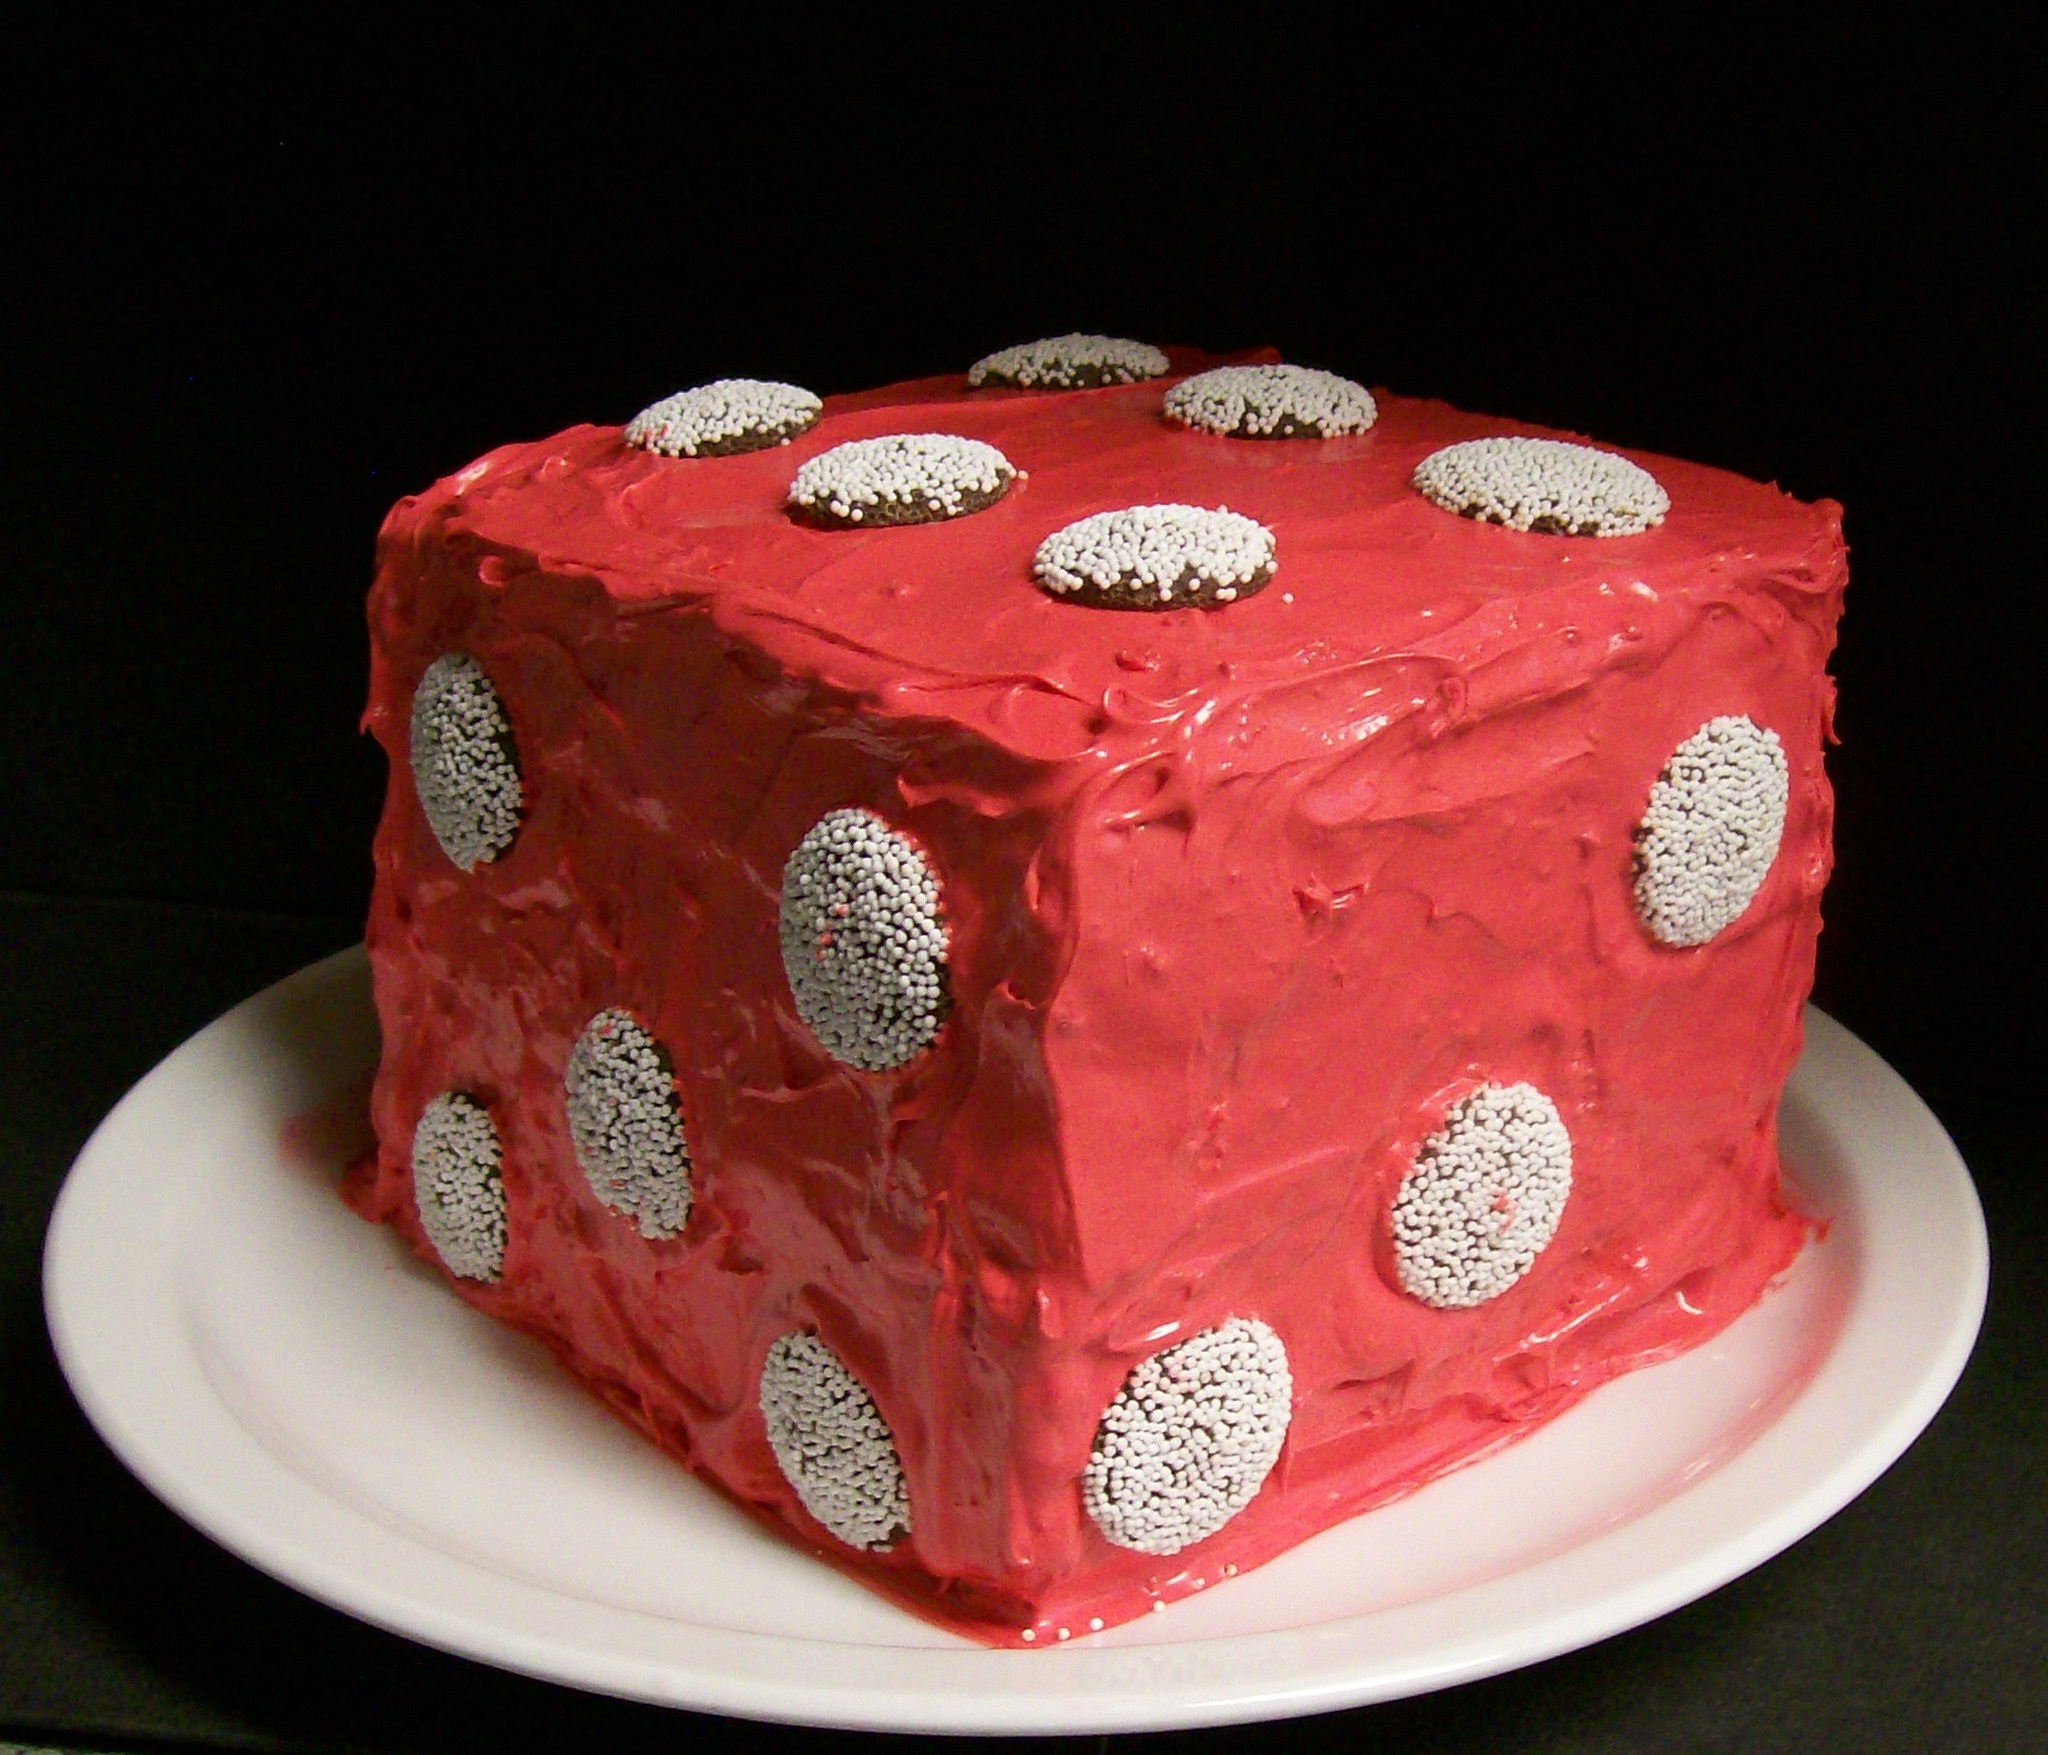 Game Night Recipe: The Cake to Die for